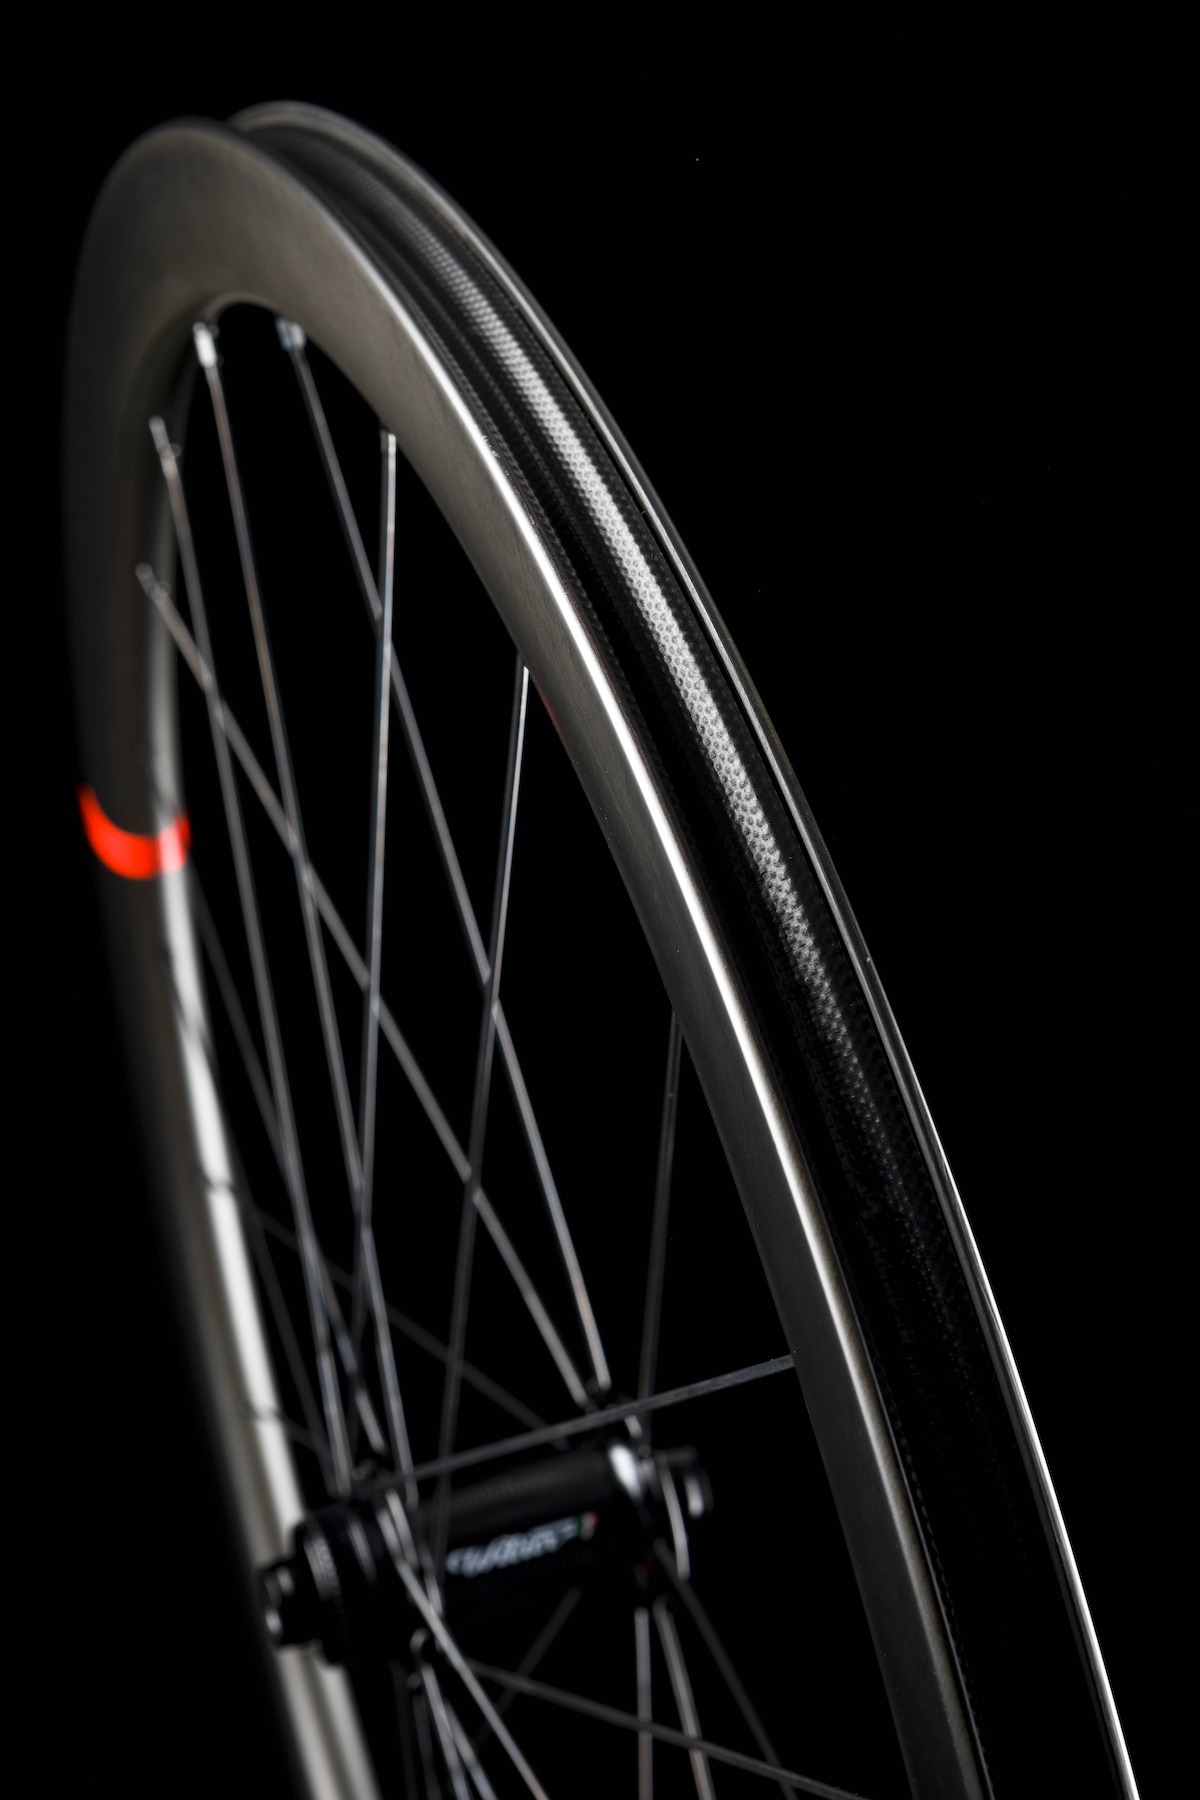 ruote wilier